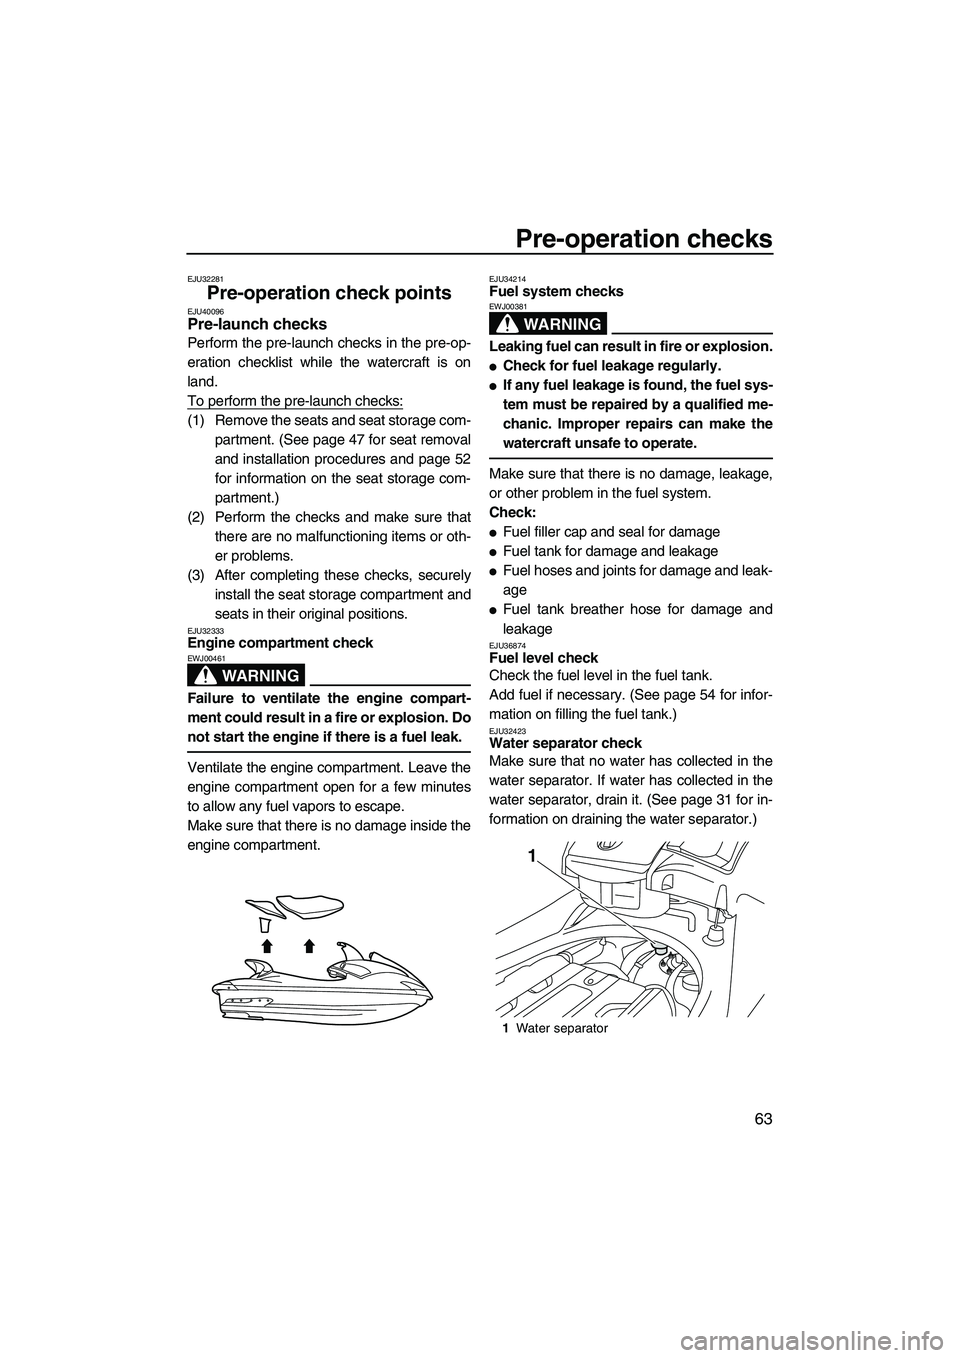 YAMAHA SVHO 2011  Owners Manual Pre-operation checks
63
EJU32281
Pre-operation check points EJU40096Pre-launch checks 
Perform the pre-launch checks in the pre-op-
eration checklist while the watercraft is on
land.
To perform the pr